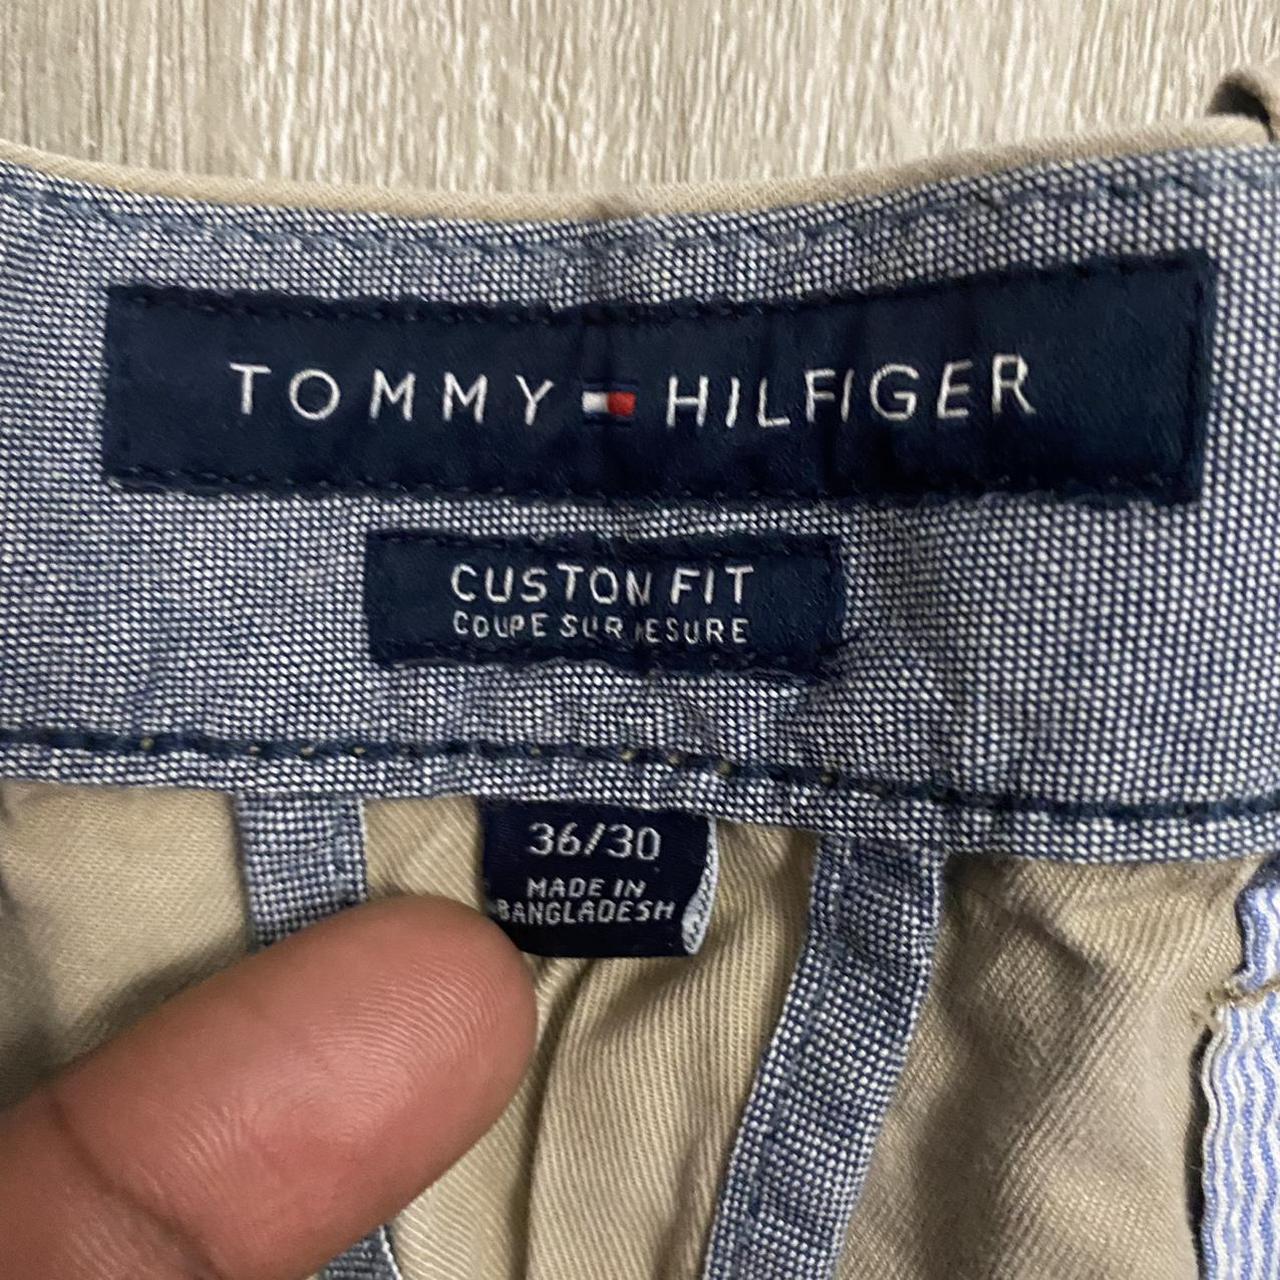 Product Image 4 - Vintage Tommy Hilfiger pants 36x30
In